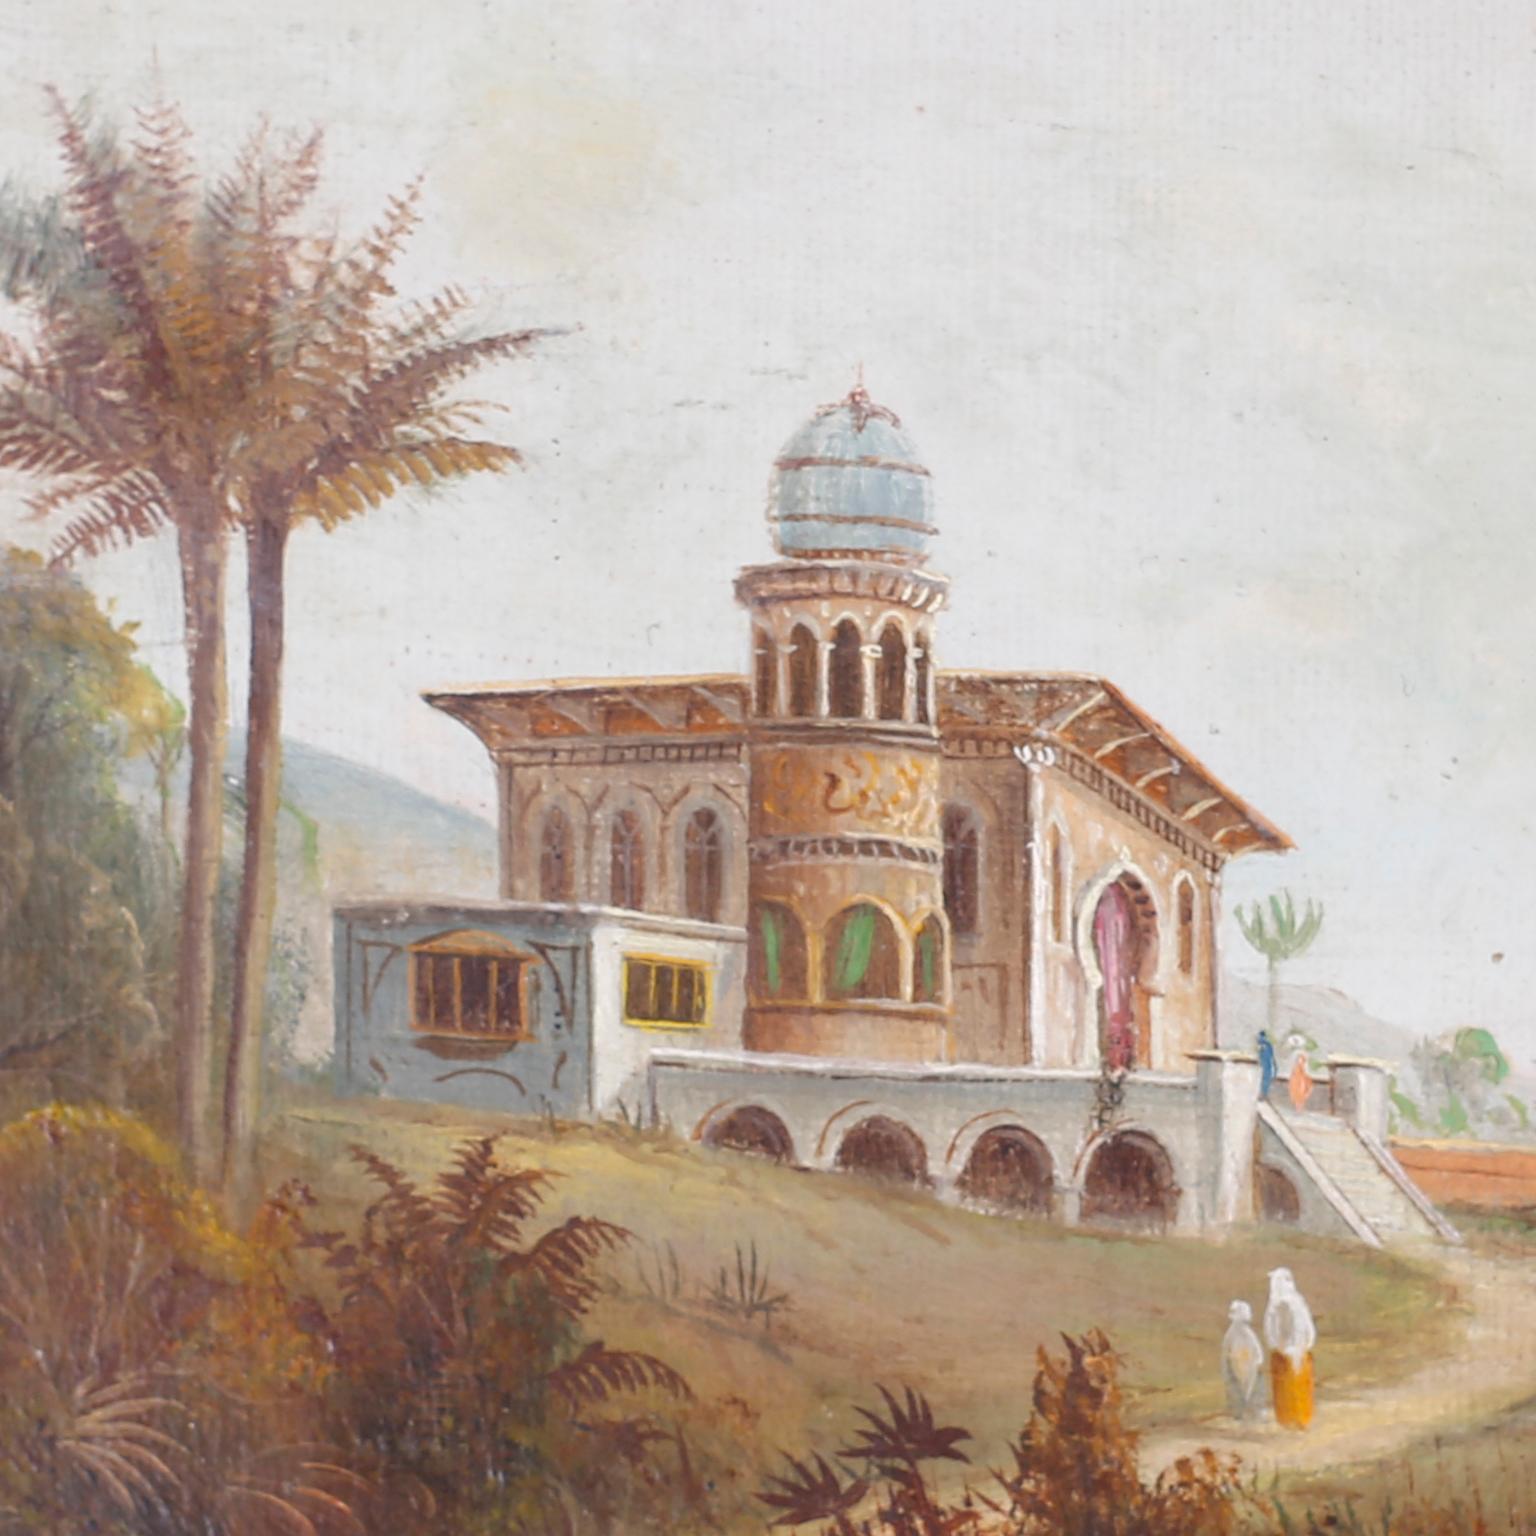 British Colonial Orientalist Oil Painting on Canvas of an Indian Landscape